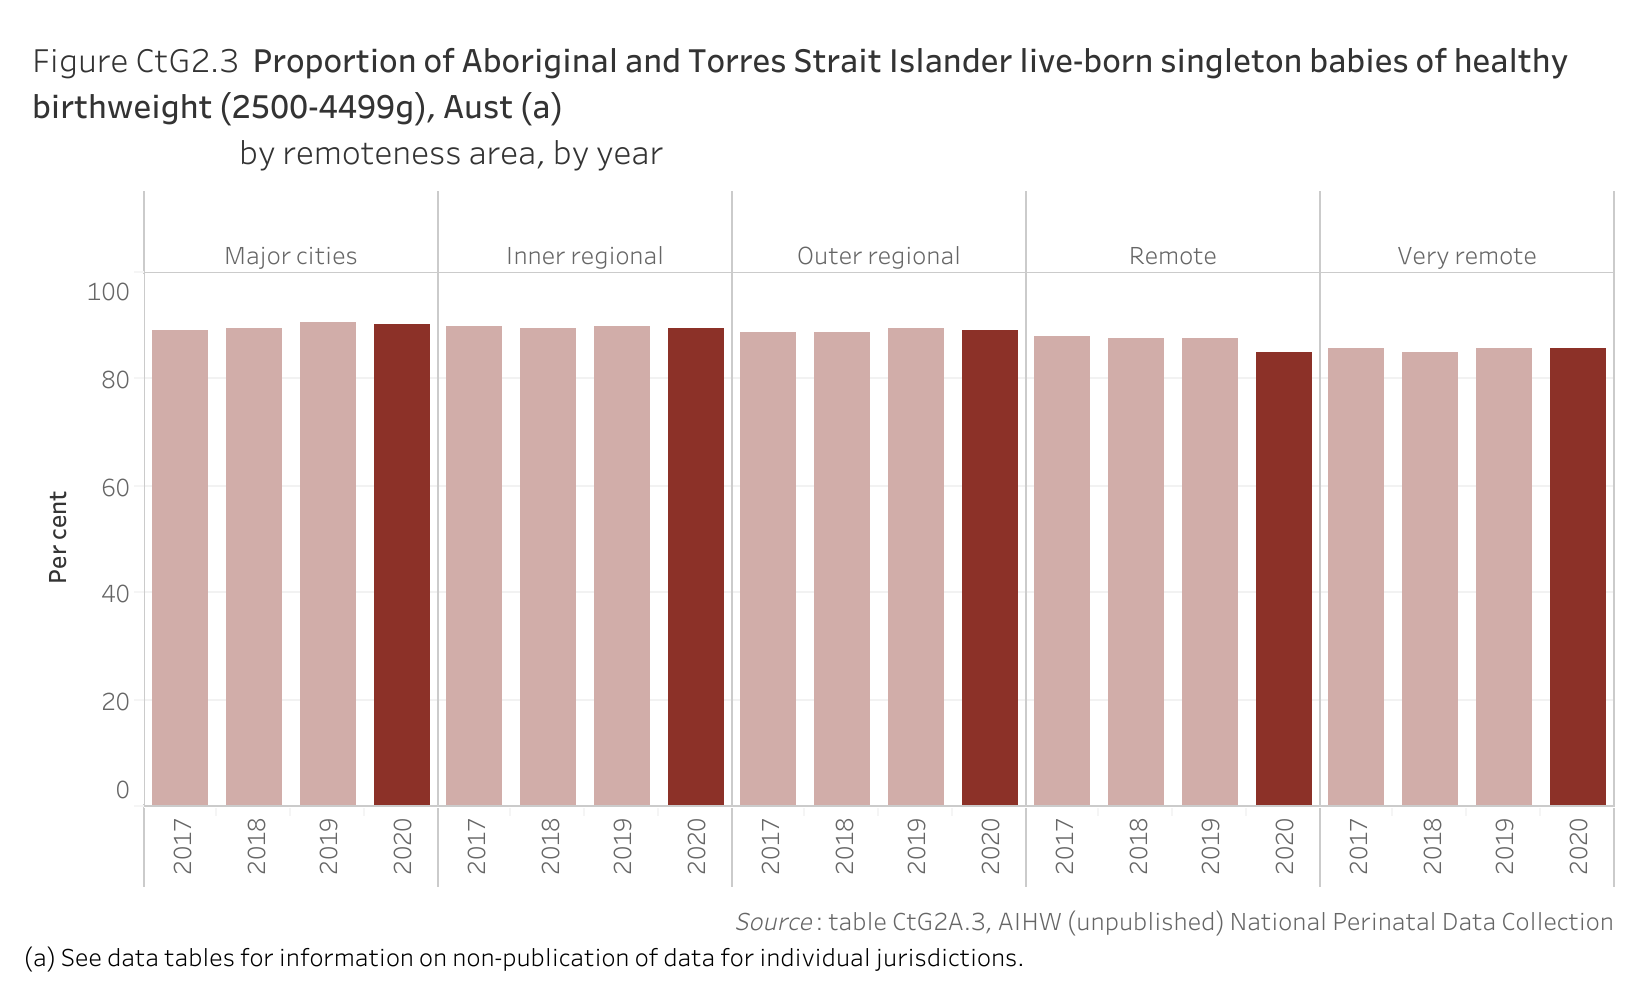 Figure CtG2.3 shows the proportion of Aboriginal and Torres Strait Islander live-born singleton babies of healthy birthweight (2500-4499g), Australia, by remoteness area, by year. More details can be found within the text near this image.